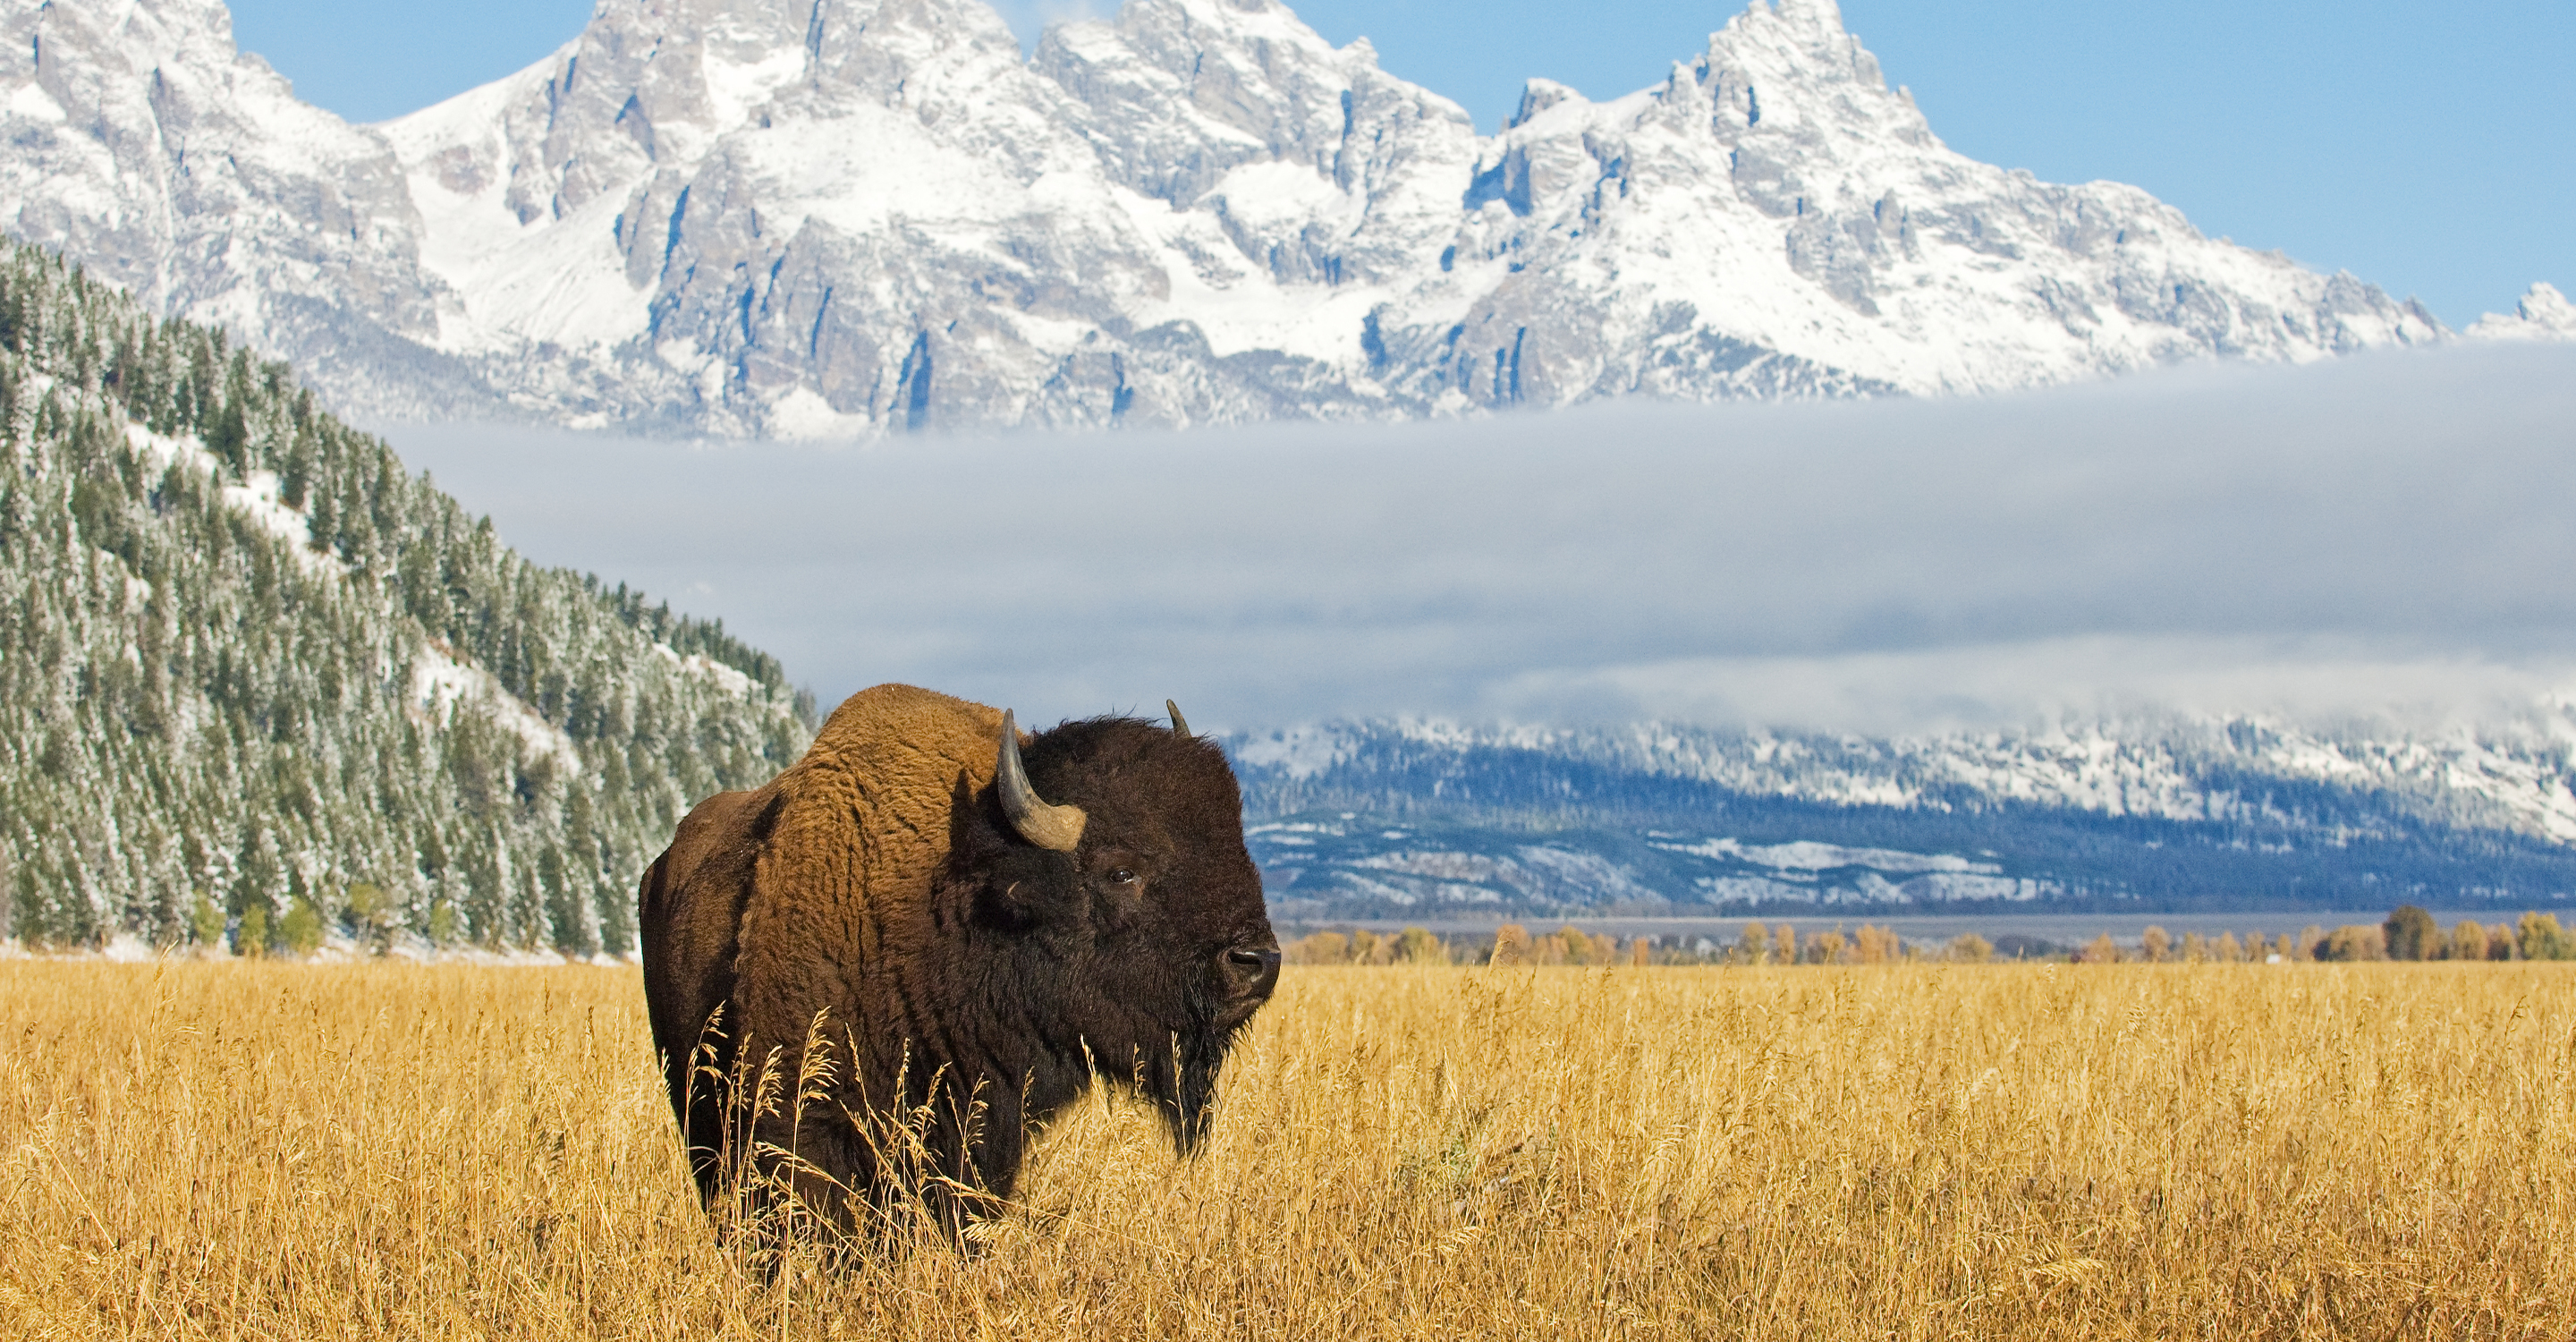 American bison in Grand Teton National Park in front of the Grand Teton mountain range, United States